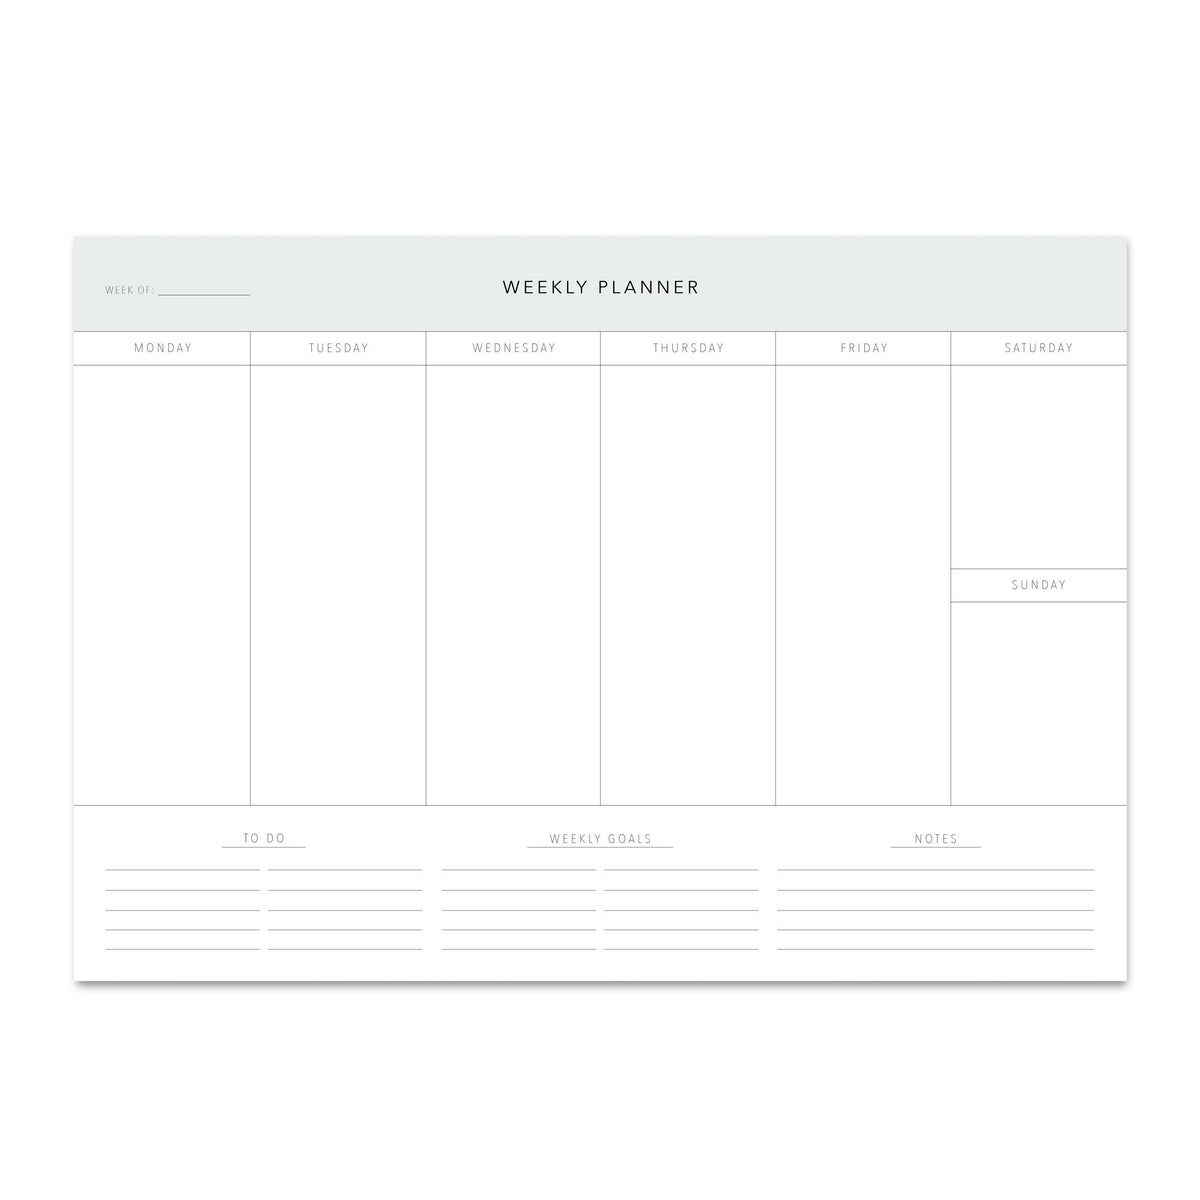 Weekly Planner - CLASSIC - A4 Wochenplaner Leo la Douce 